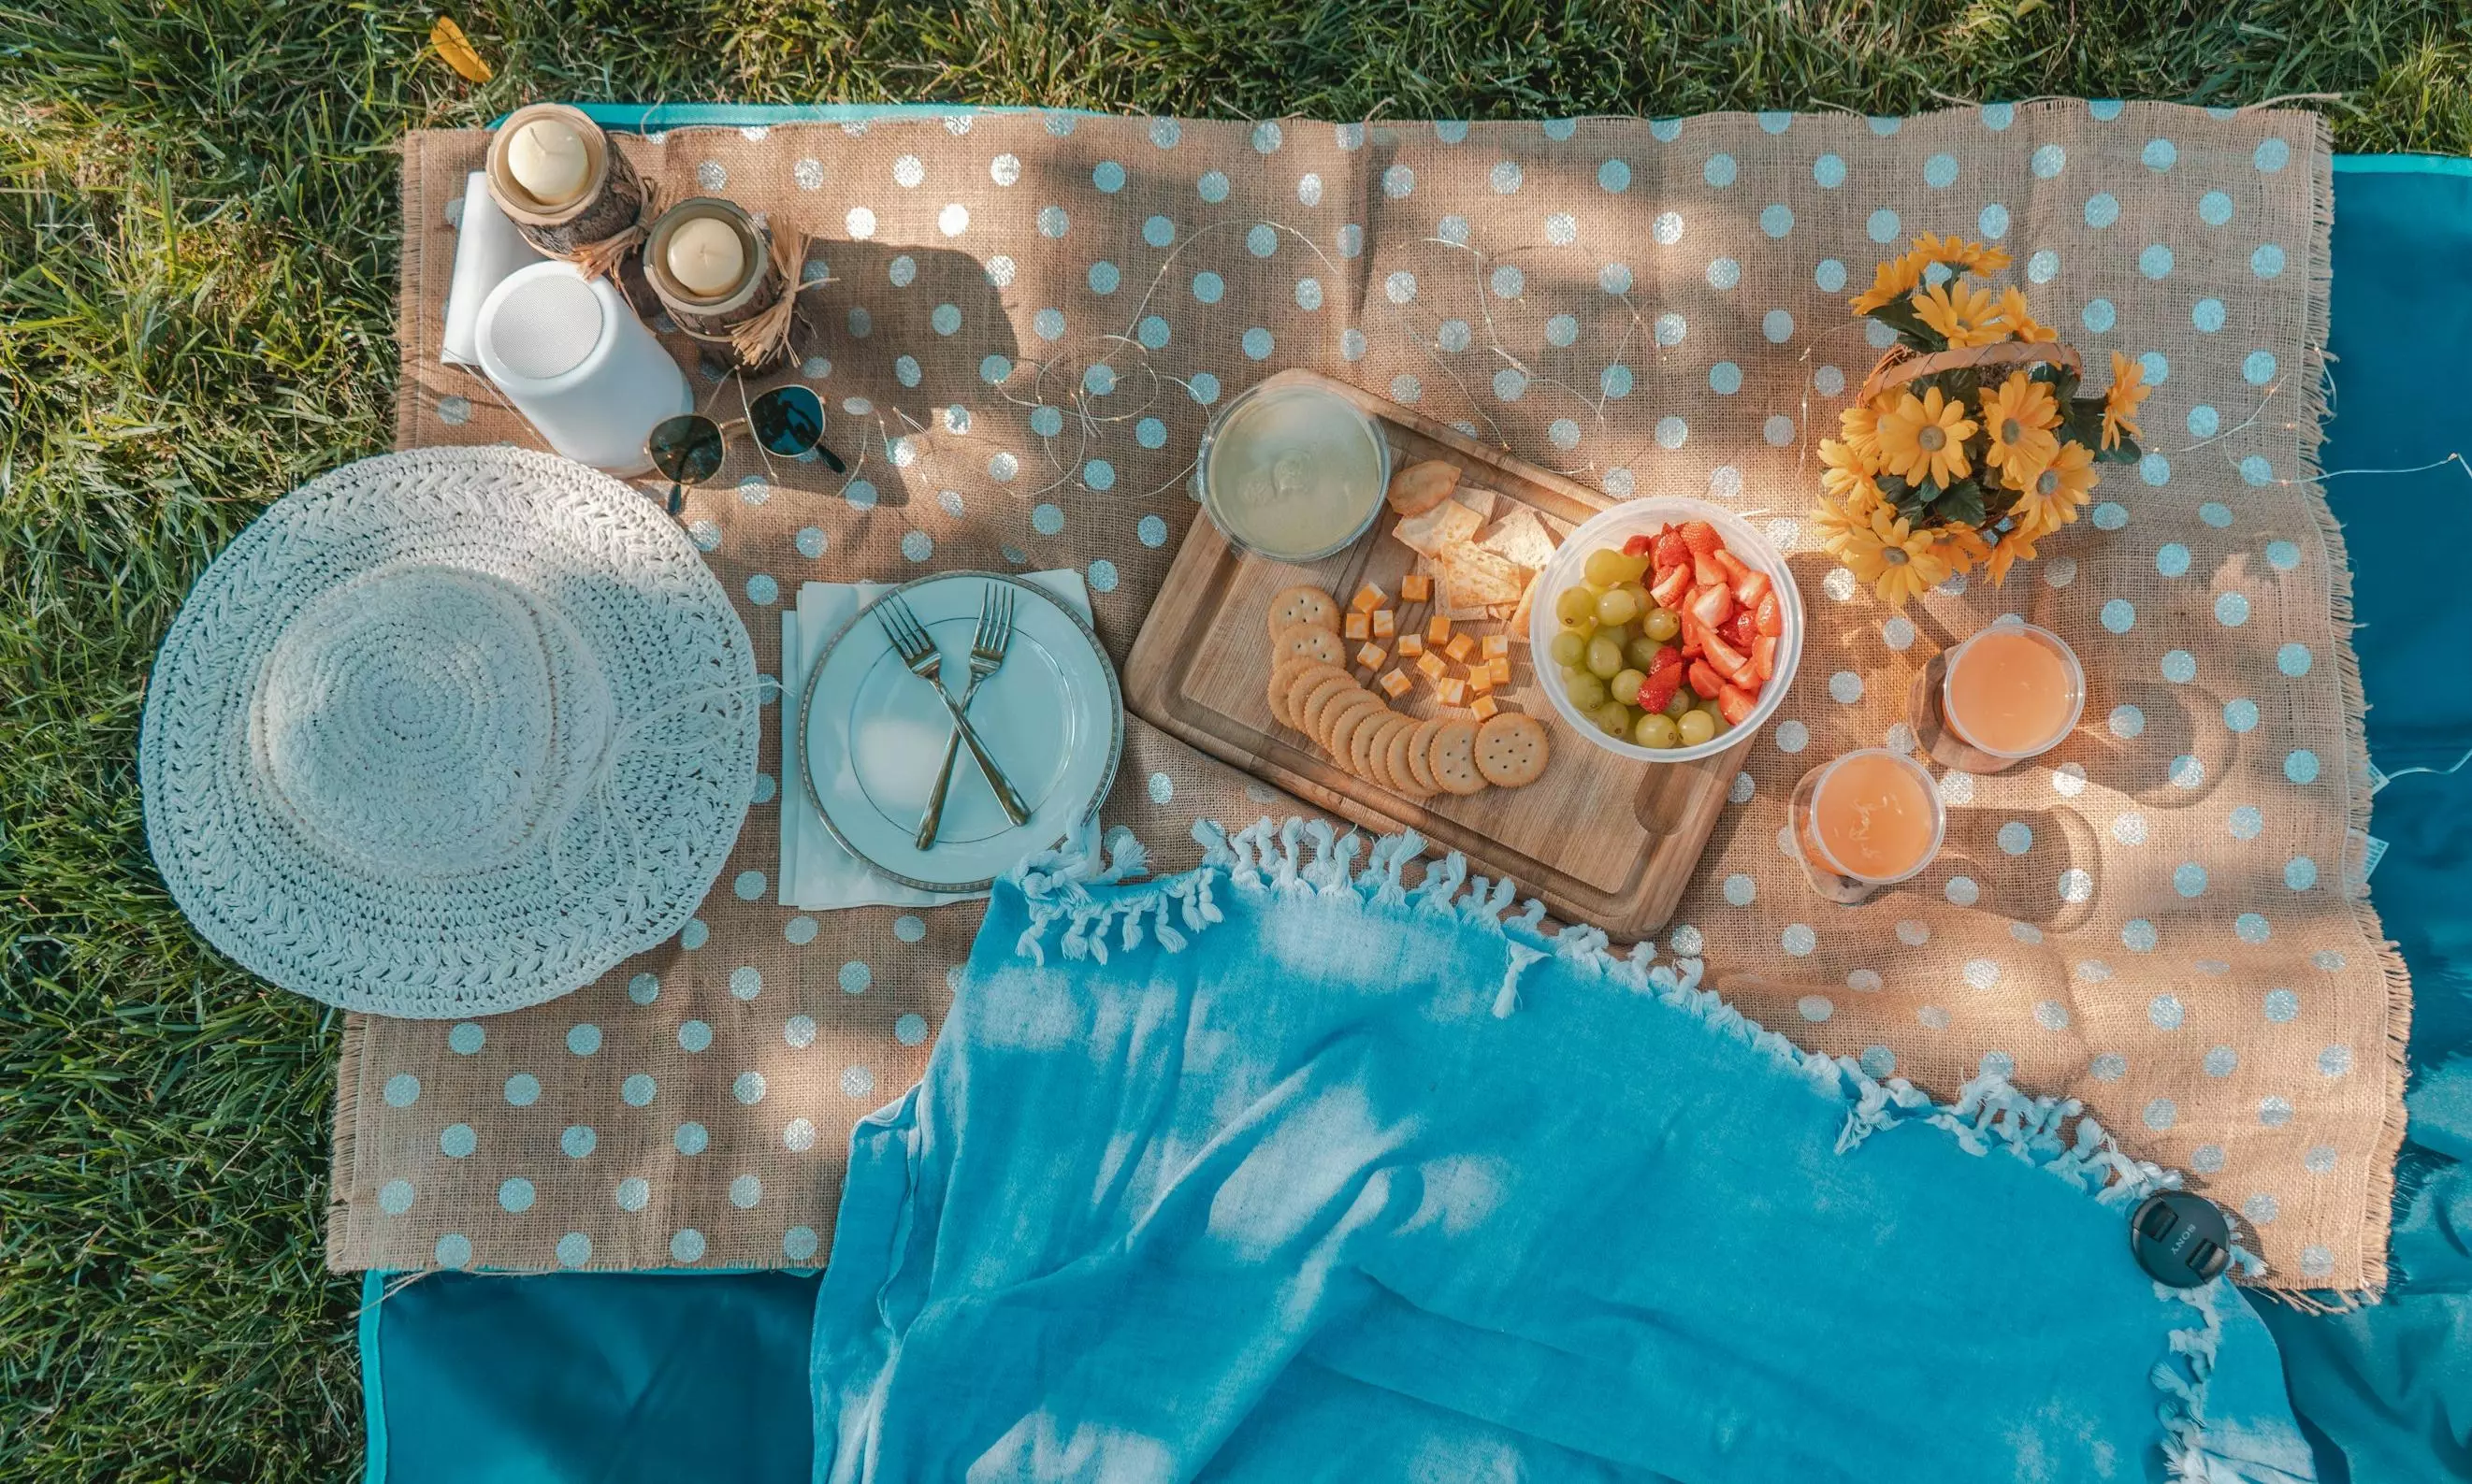 Enjoy a perfect day outdoors with nostalgic treats, savoury snacks and refreshing drinks this International Picnic Day